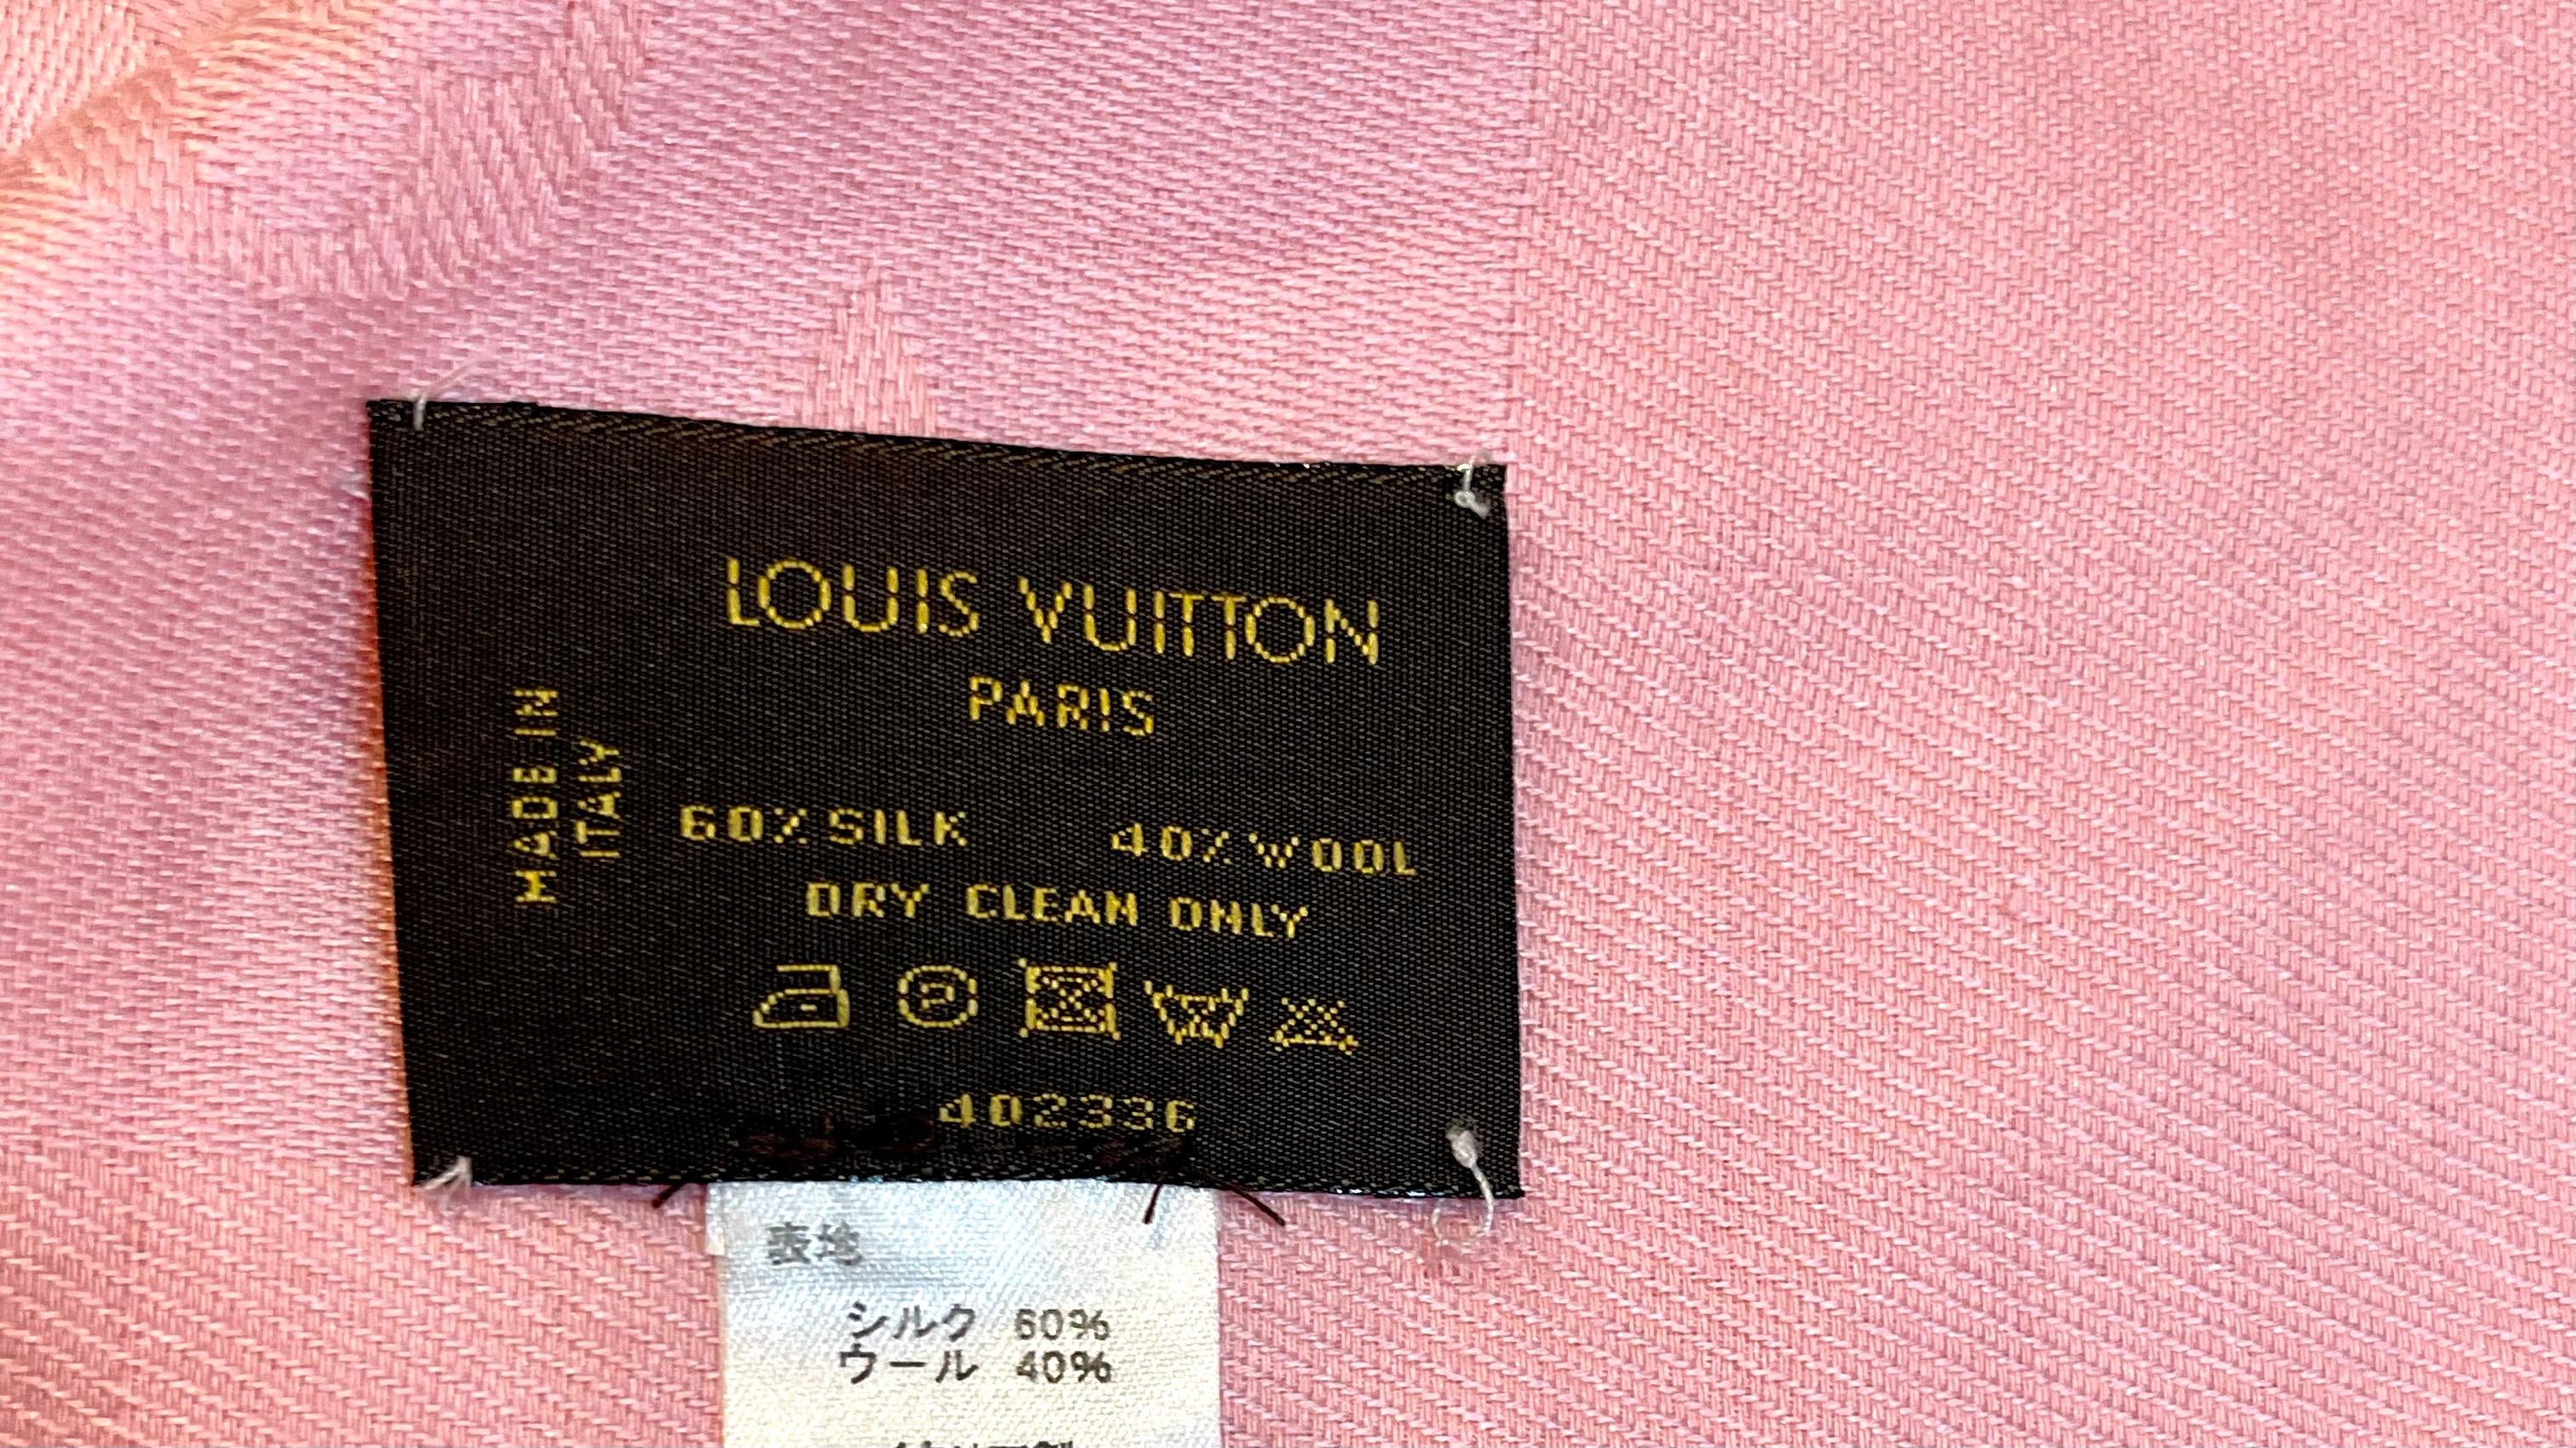  New Louis Vuitton Pink/Rose Monogram Shawl Scarf/Wrap Size 56X56 in excellent condition just like brand New
Take home this beautiful   monogram shawl .
All pictures are of the actual shawl
Made from a bland of 60% silk and 40% Wool
Authentic Louis